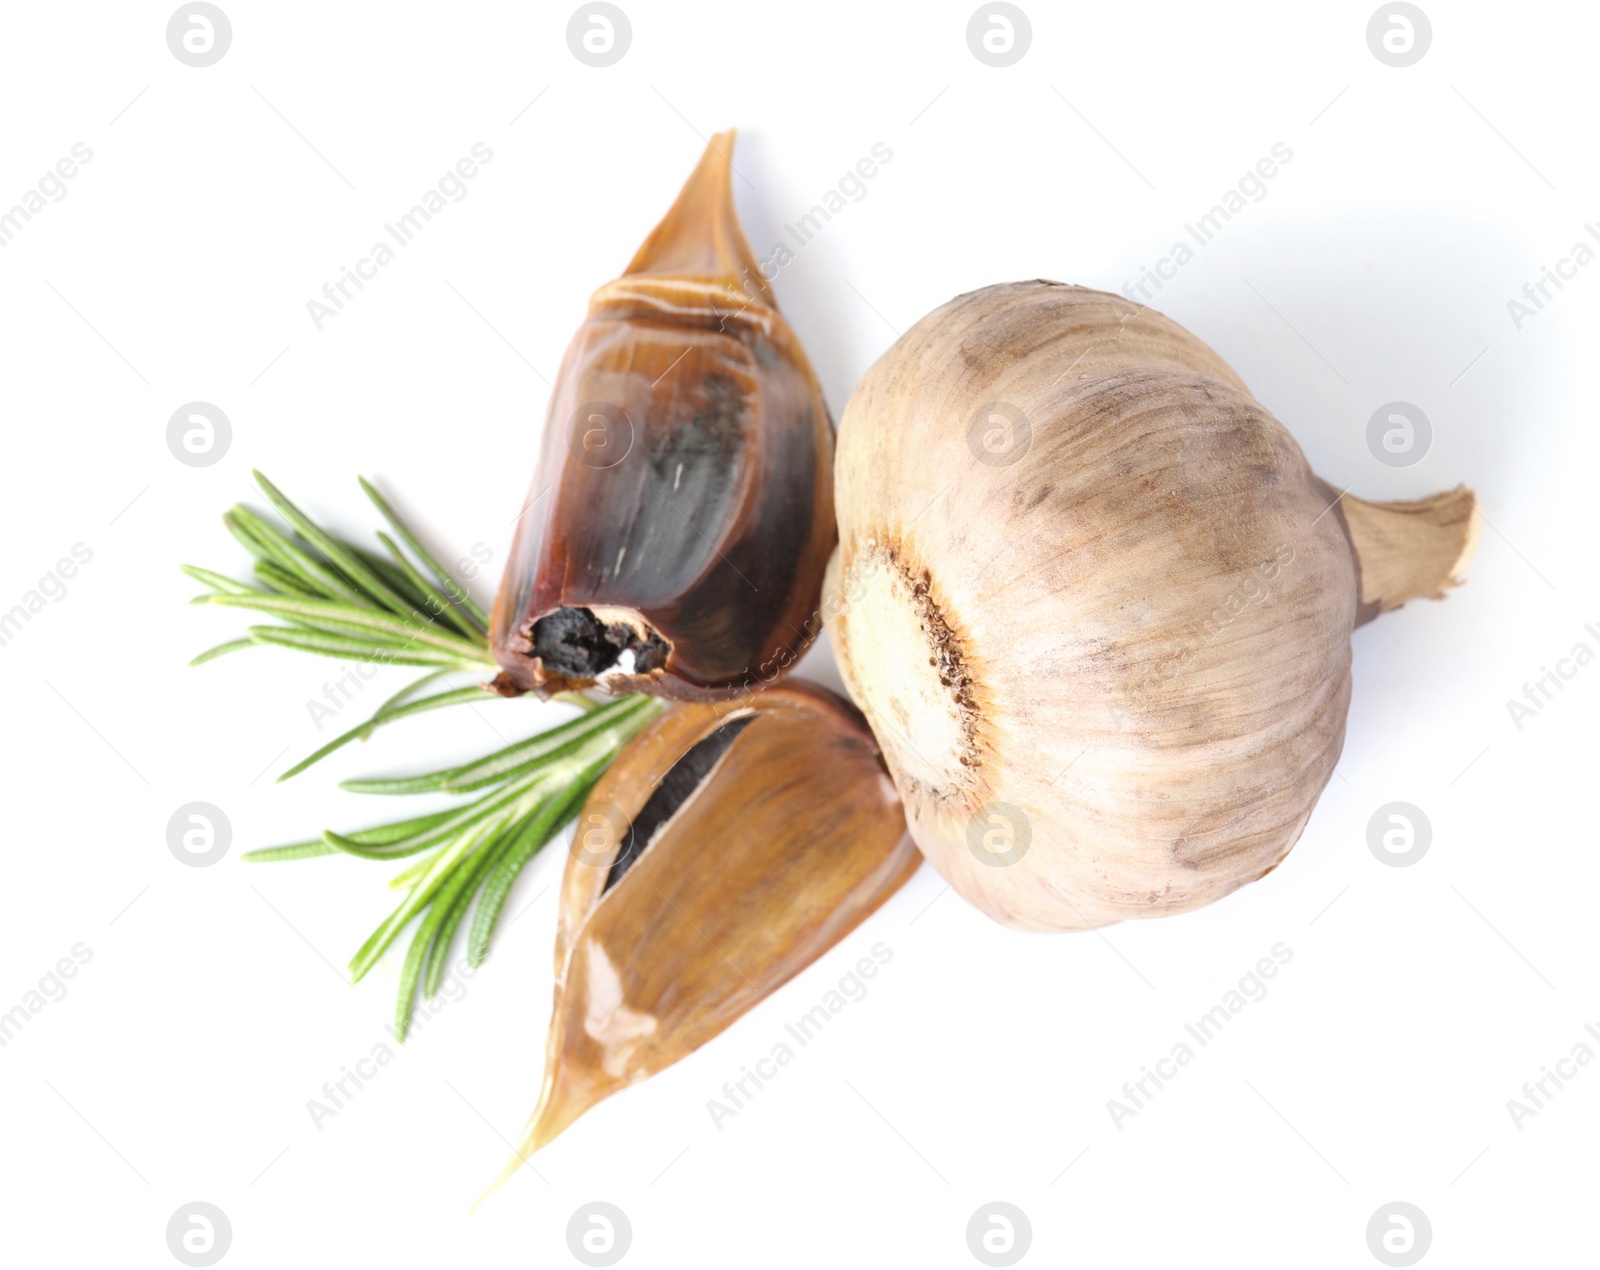 Photo of Aged black garlic with rosemary on white background, view from above